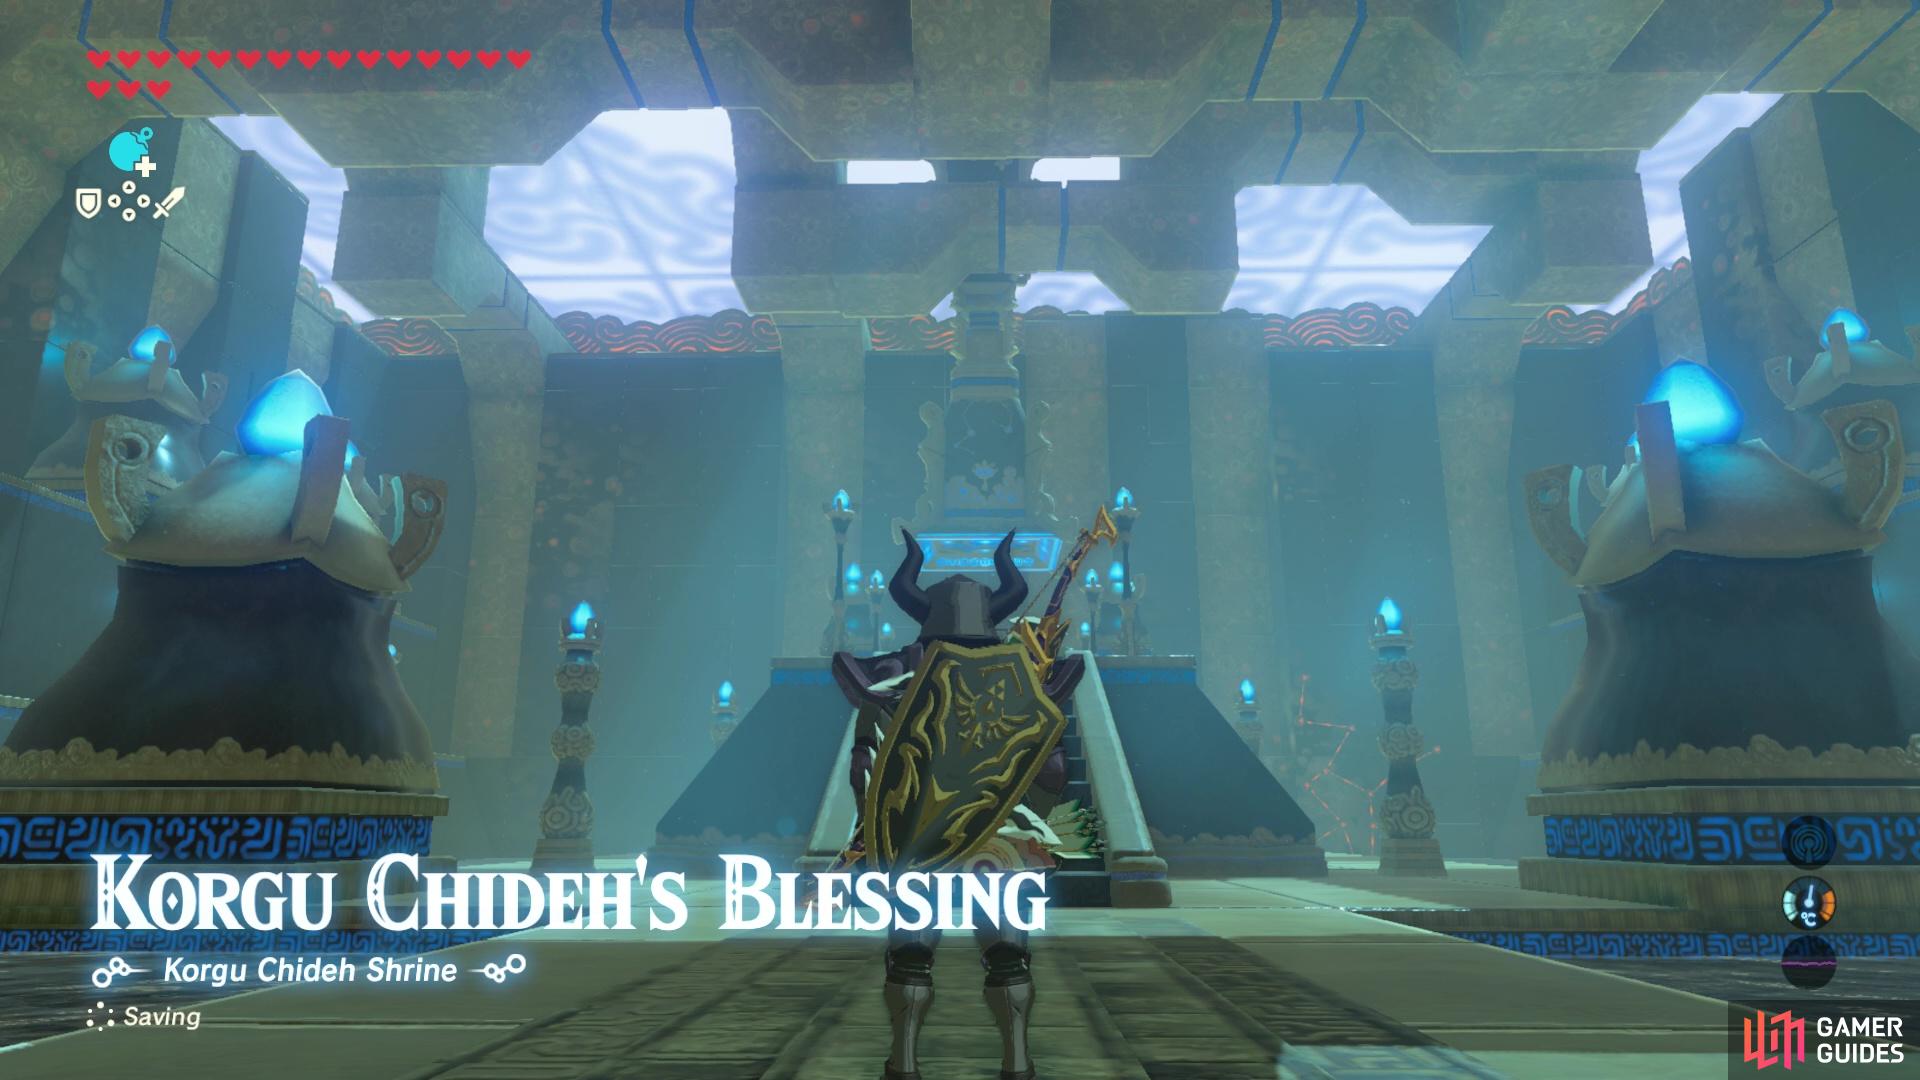 After completing the shrine quest, you’ll be rewarded with a blessing shrine. 